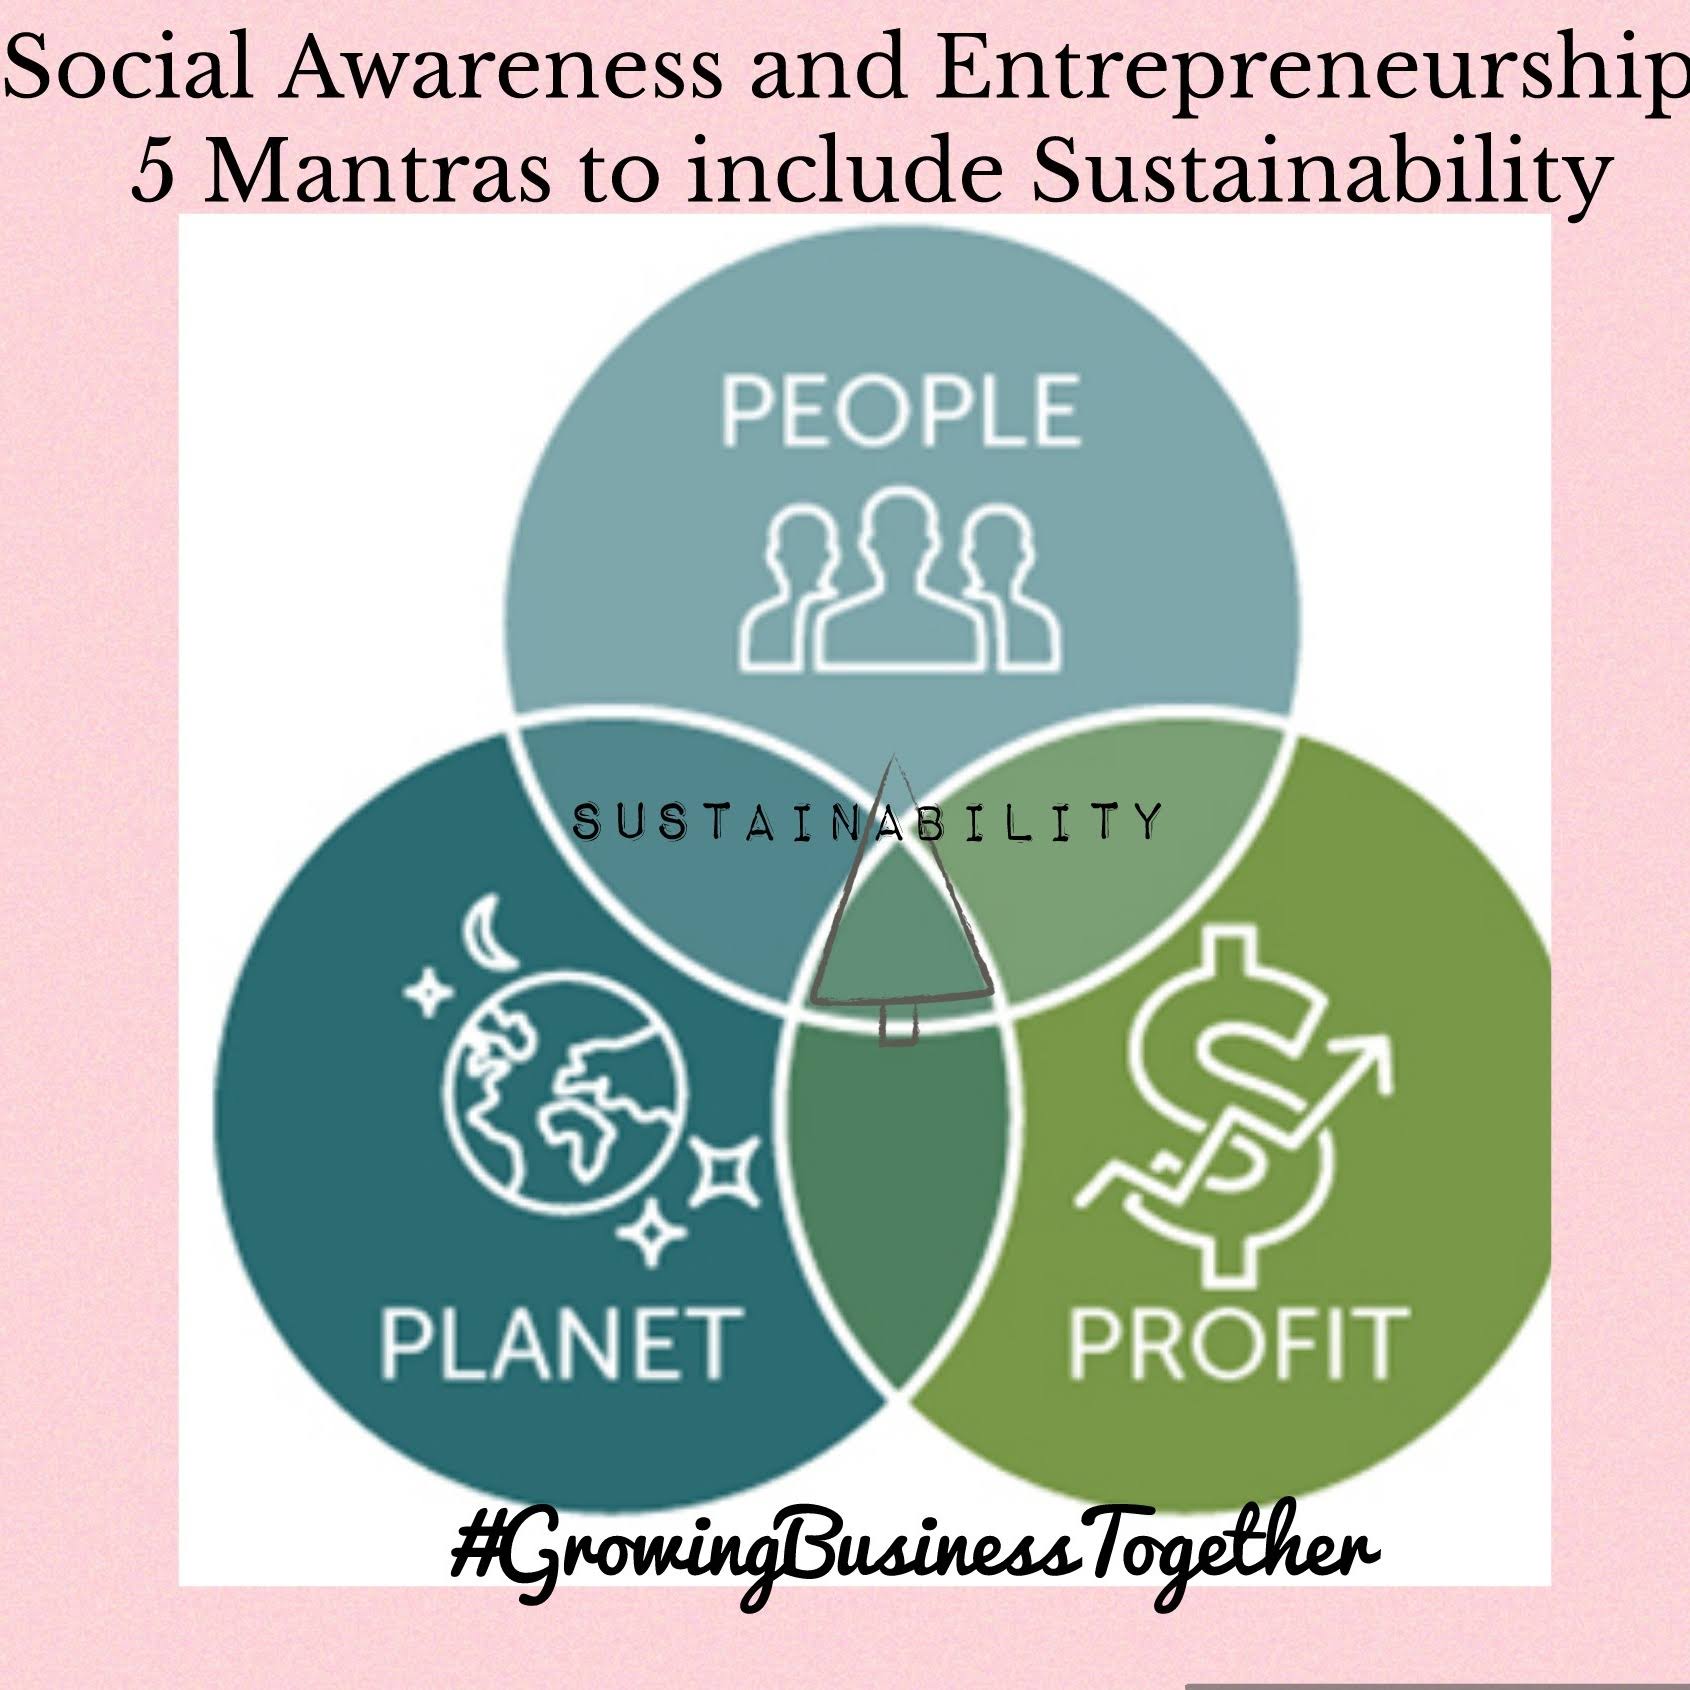 Social Awareness and Entrepreneurship: 5 Mantras to include Sustainability